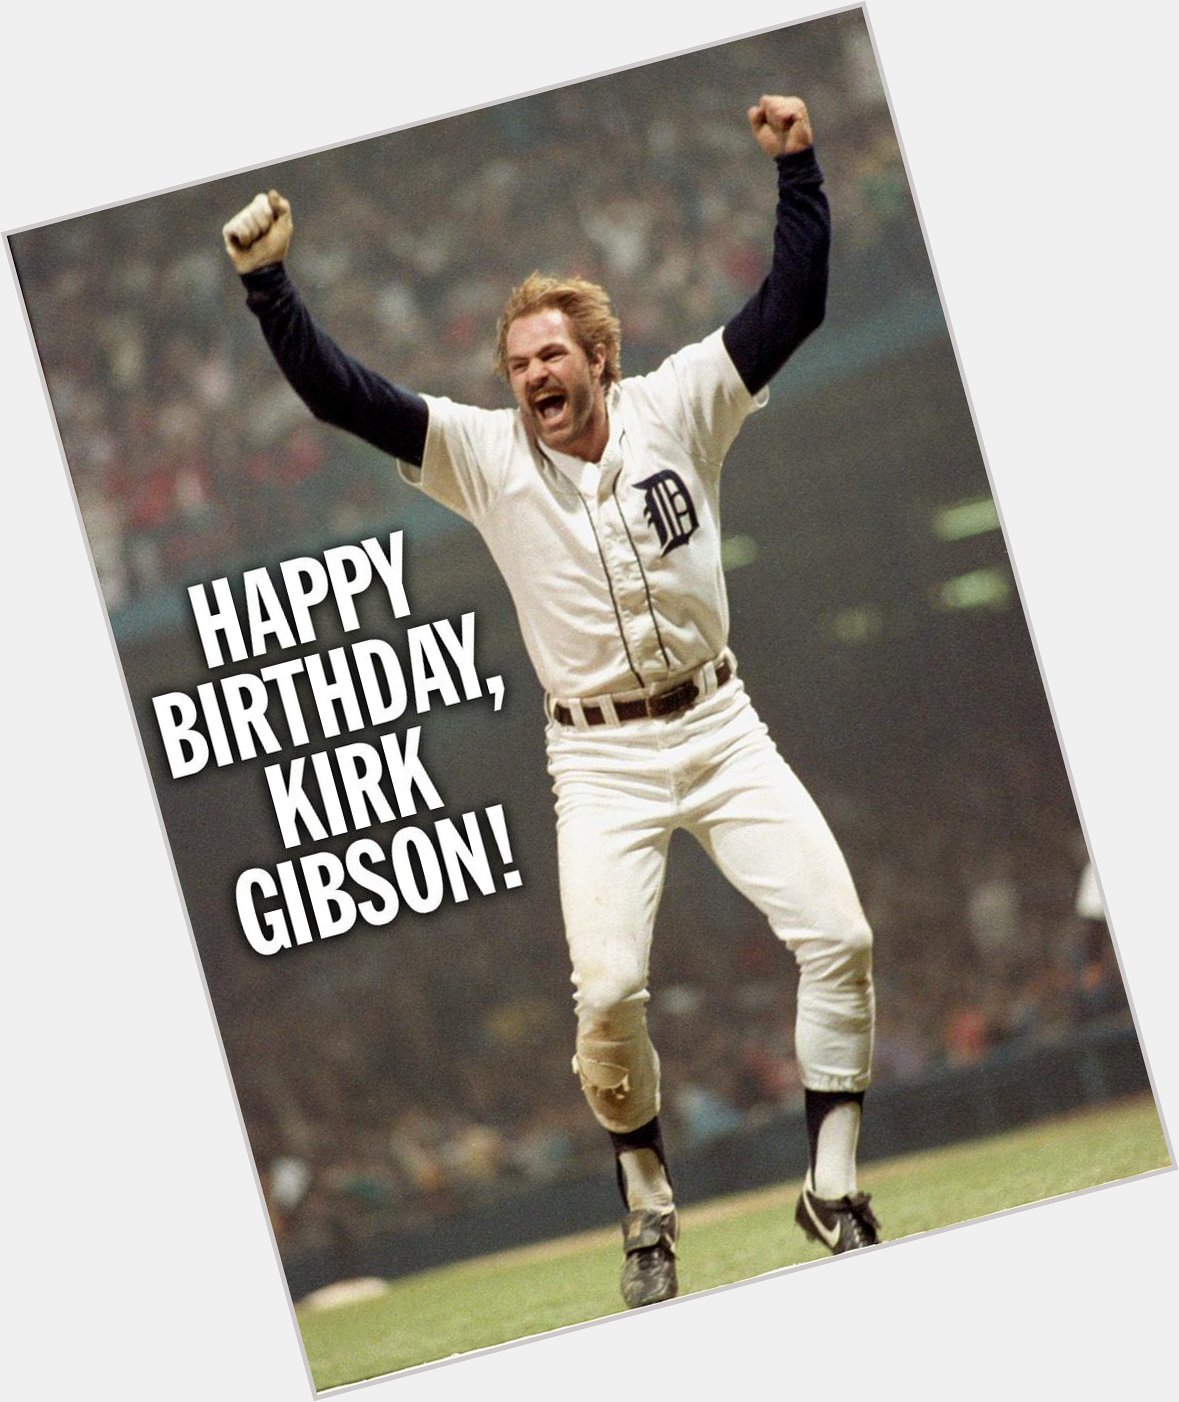 Happy birthday to great Kirk Gibson! 